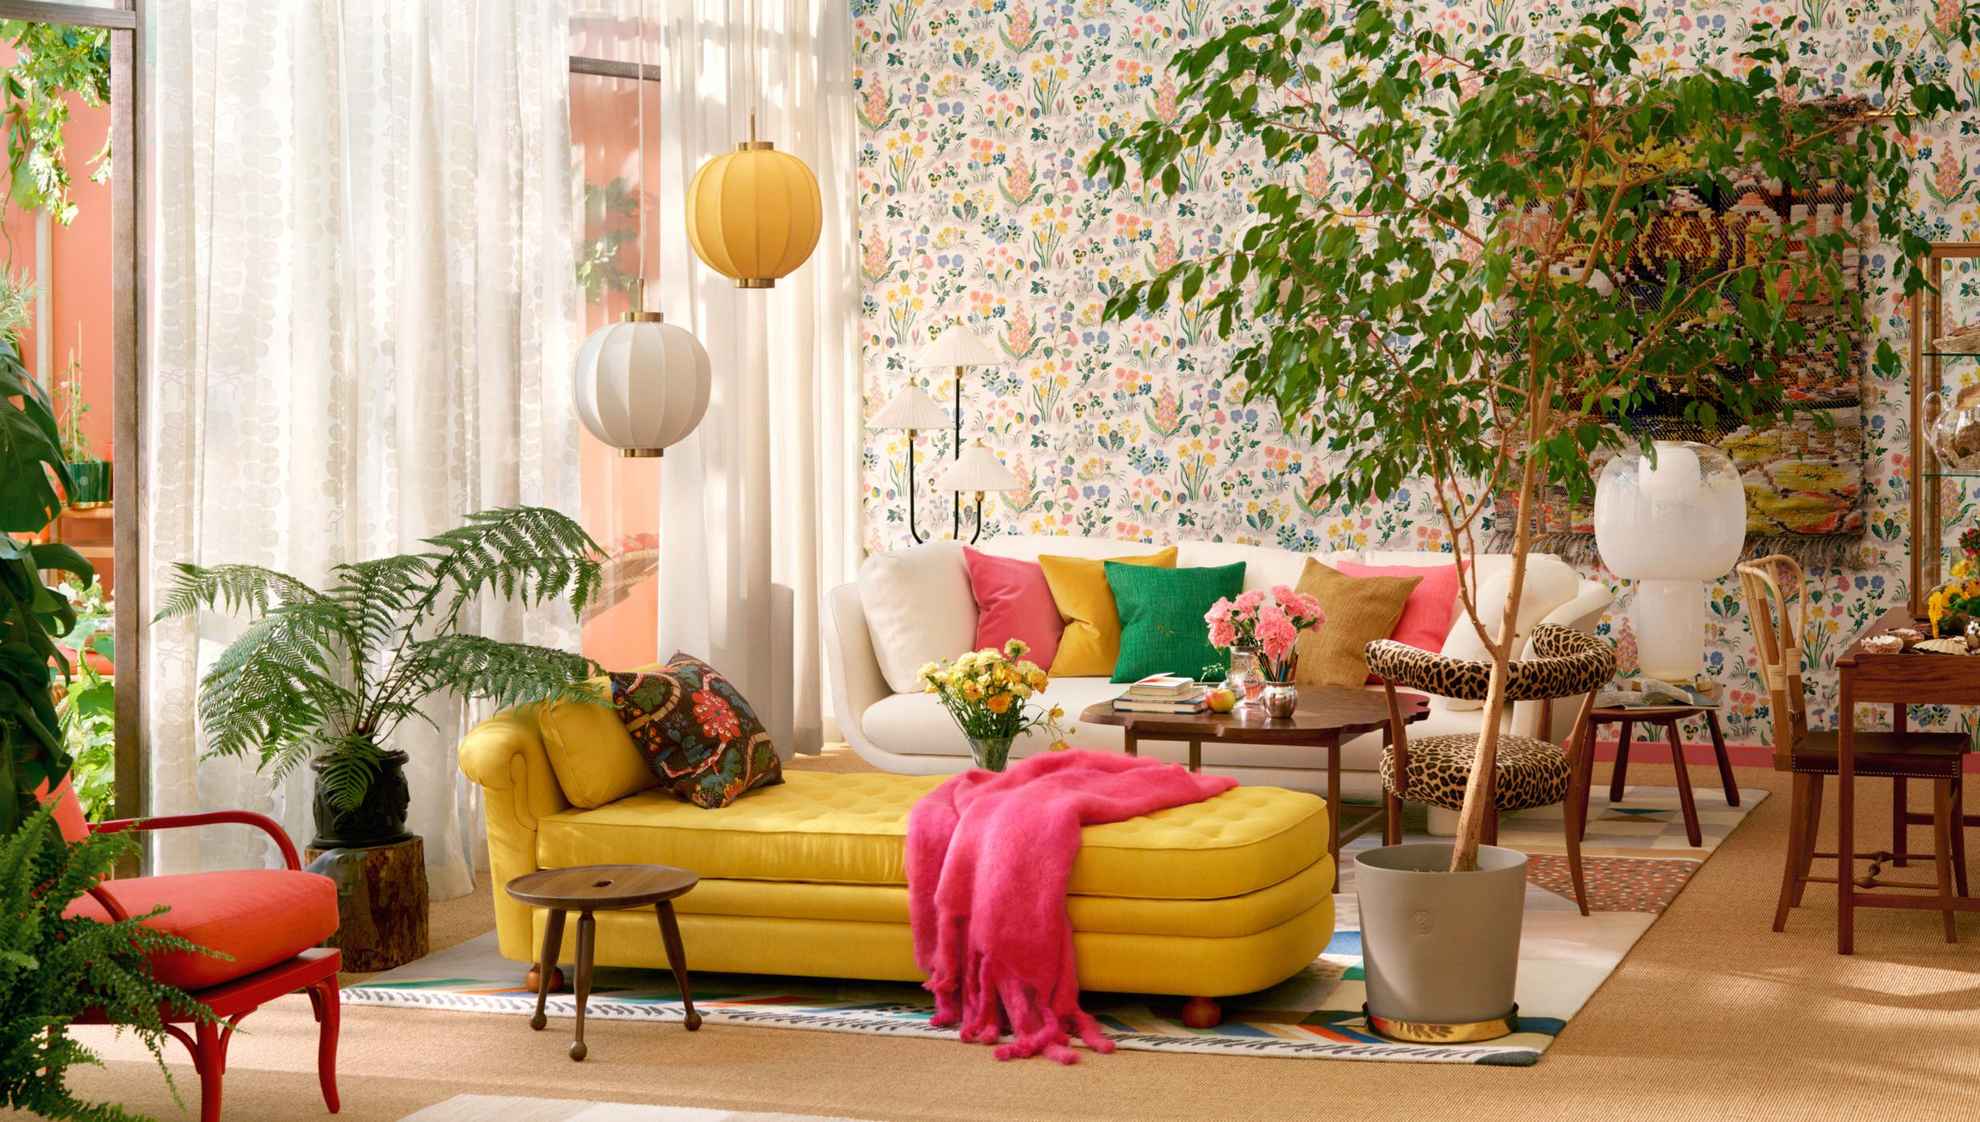 A living room with a beige sofa with colourful cushions at the back and a yellow chaise longue in the centre of the room. To the right of the chaise longue is a large green floor plant. The sheer white curtains let in natural light.